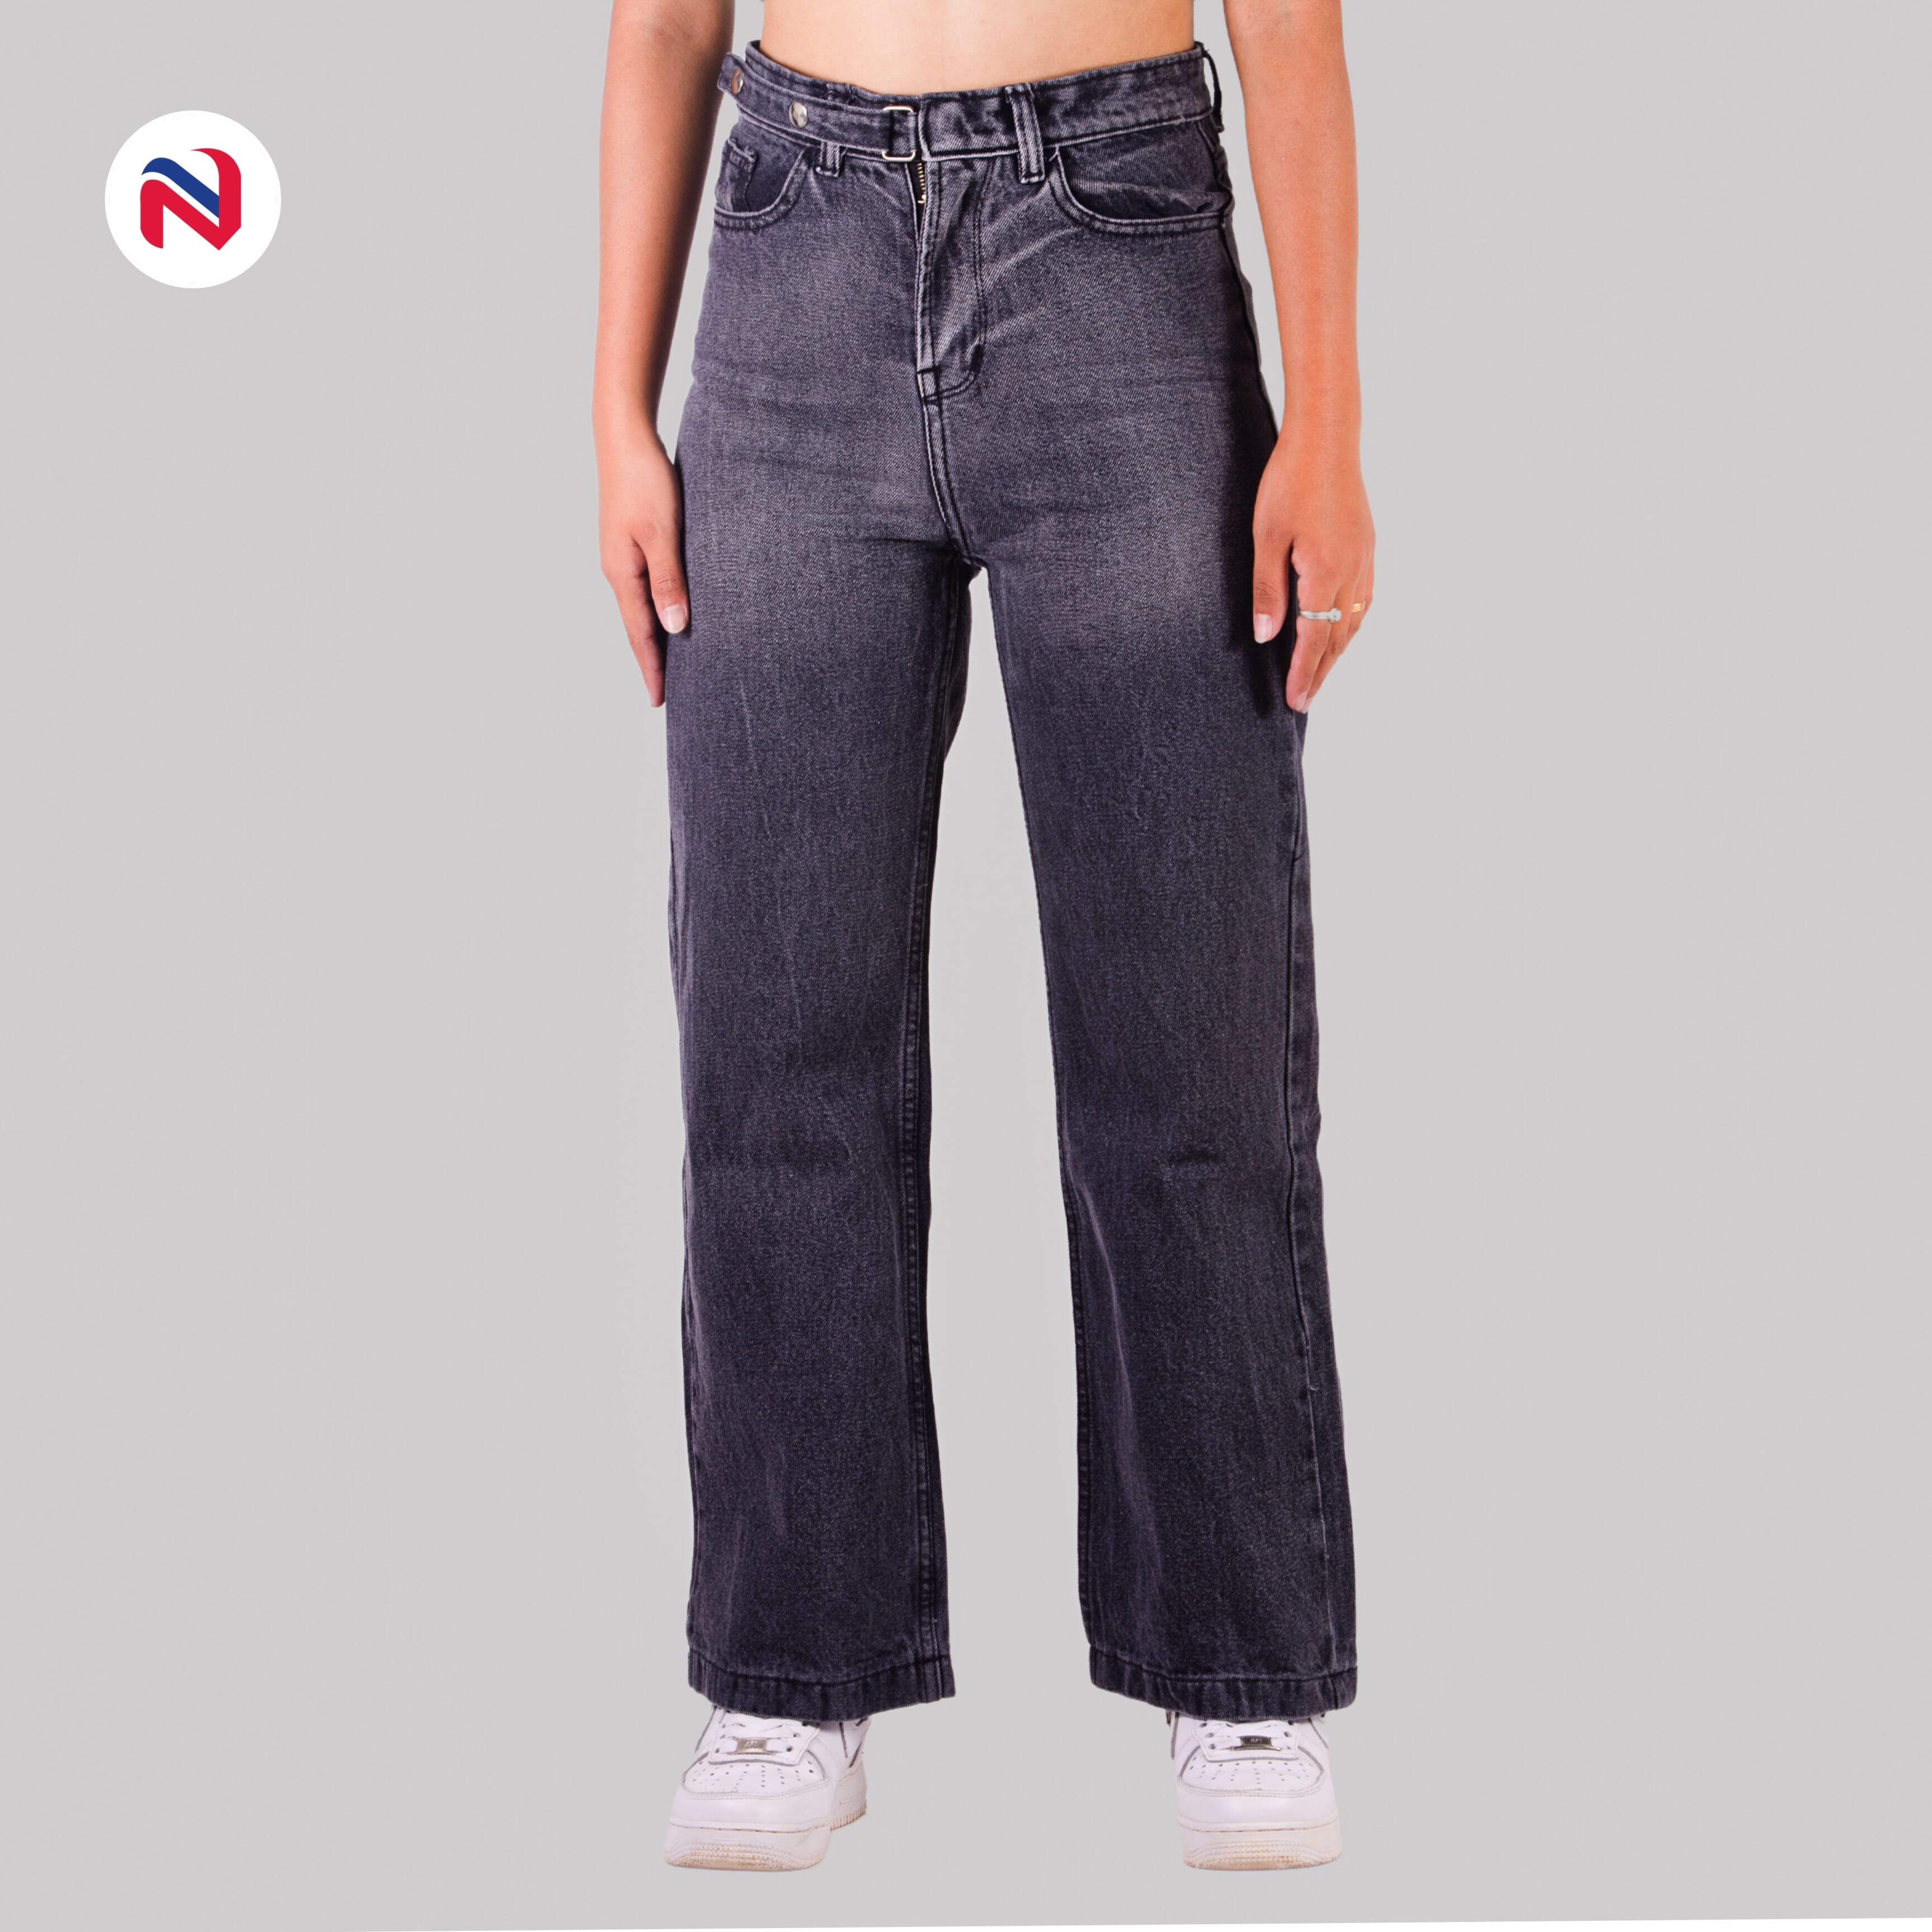 motel “parallel jean in cord sand” pants! | Rock jeans, Jeans size chart,  Wide jeans